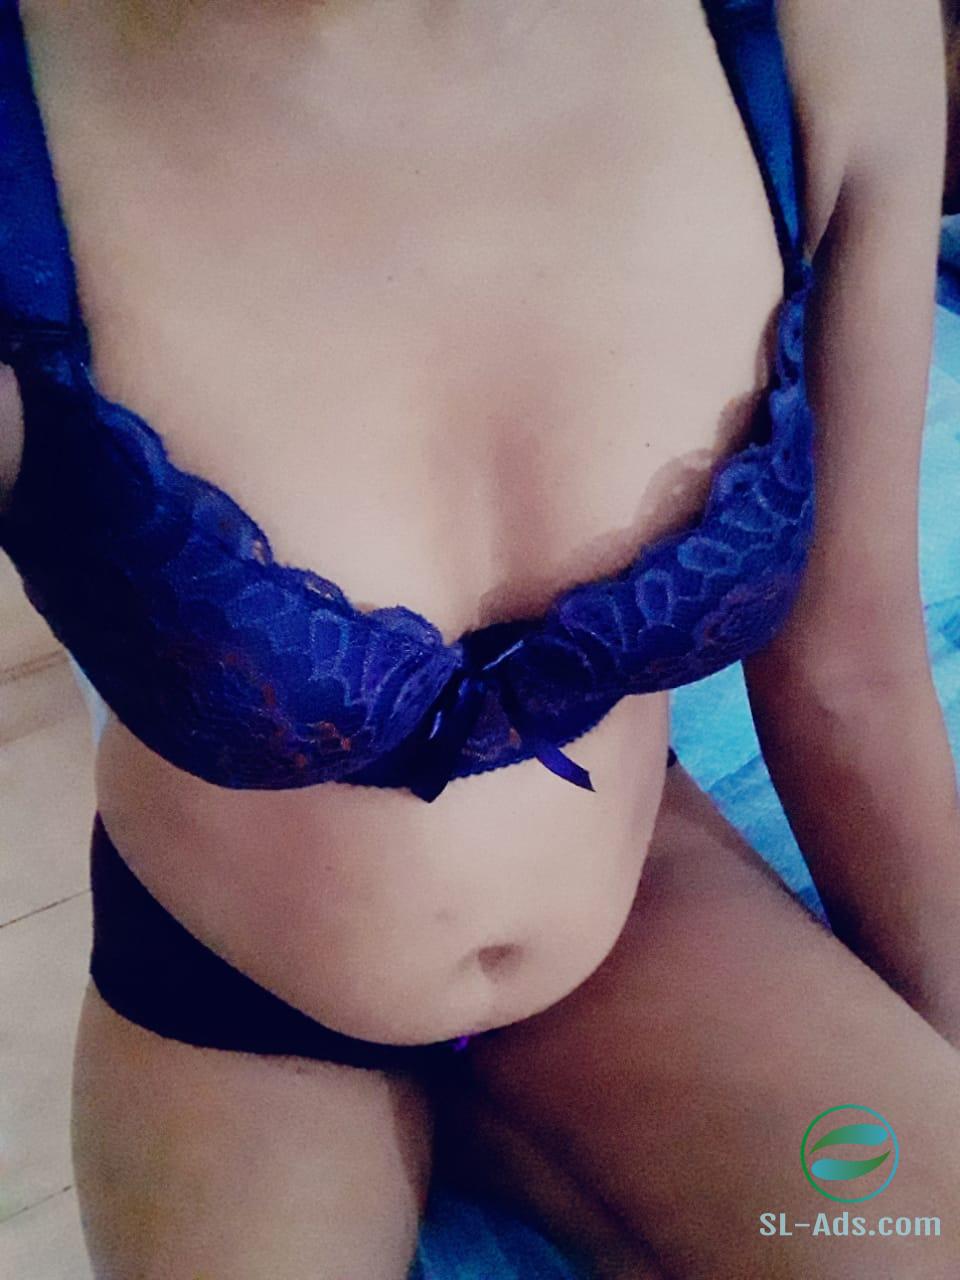 Real Live CAM service, sexy girl💋💖 